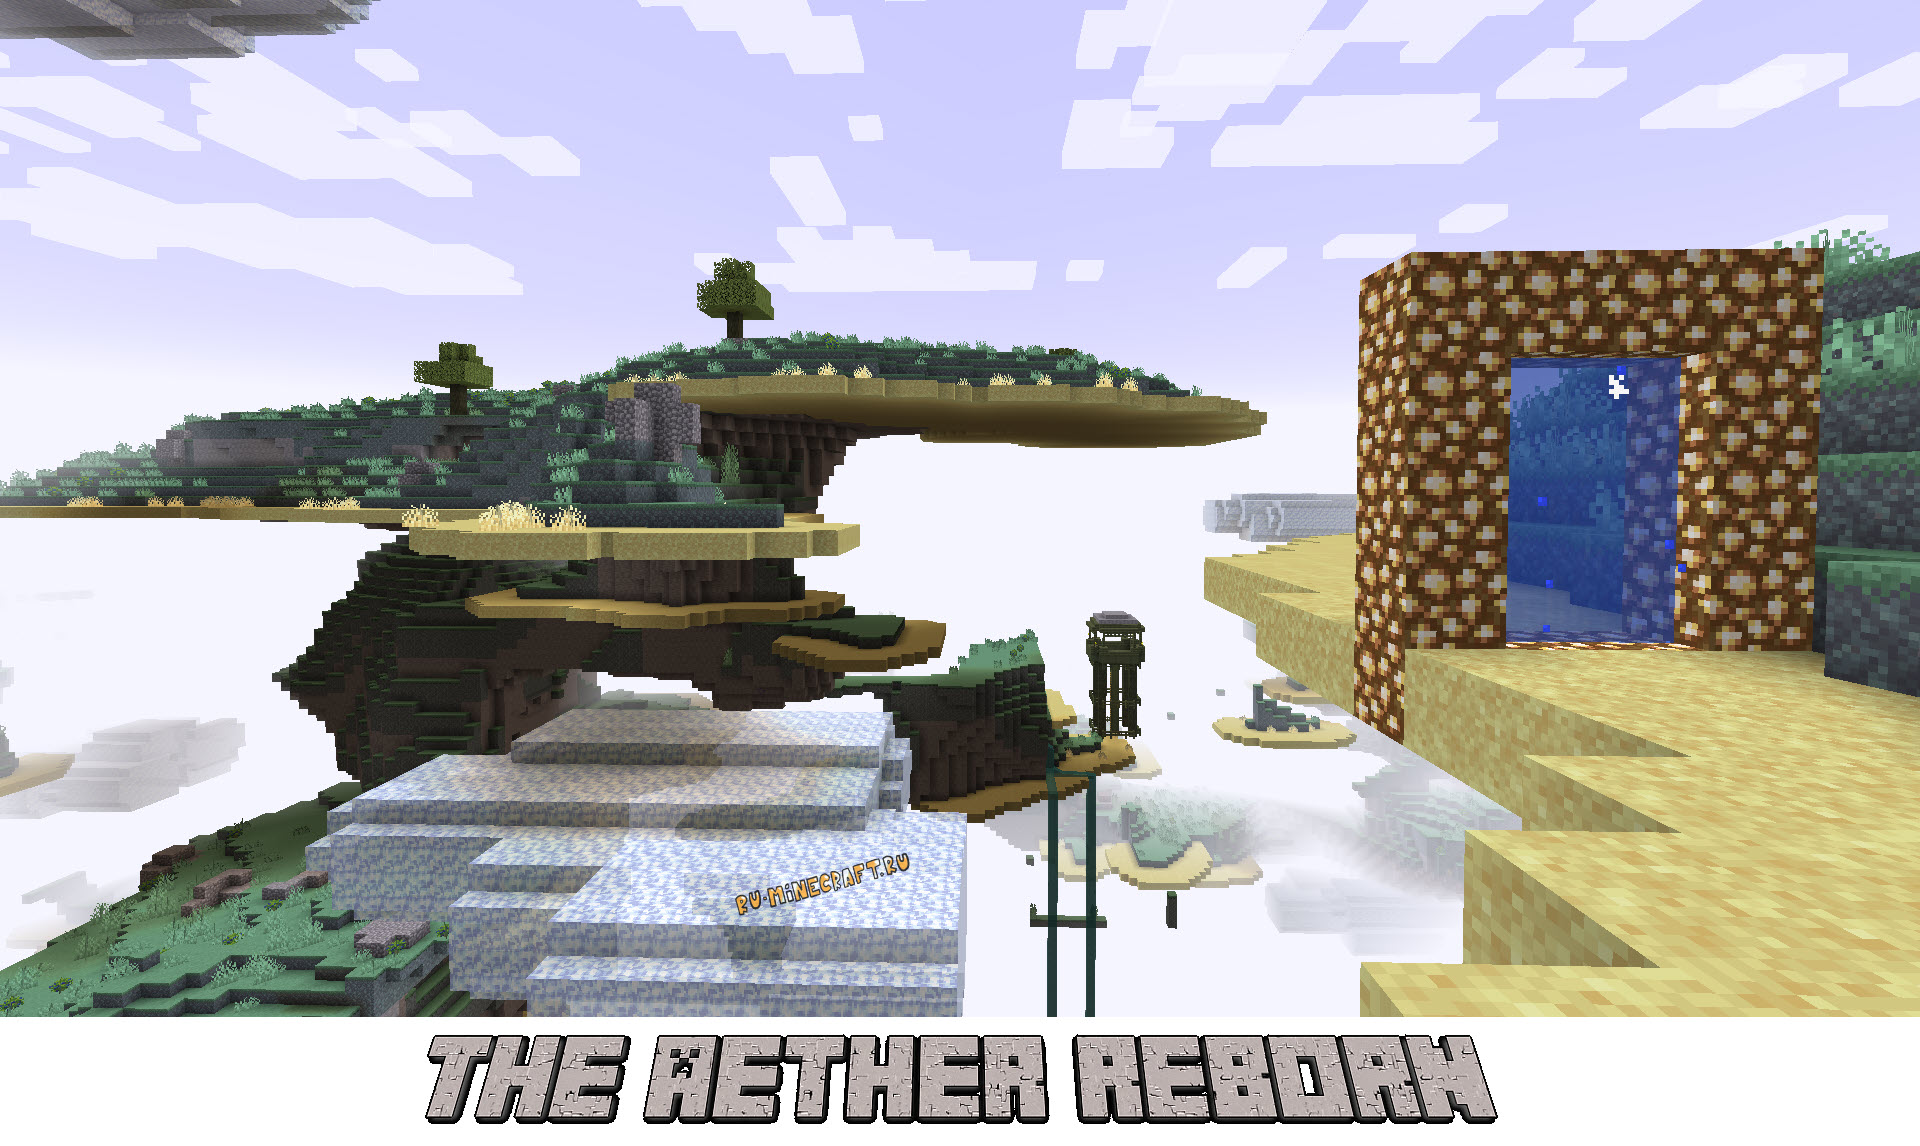 Aether 1.20 1. The Aether Reborn 1.16.5. Aether 1 мод. Майнкрафт мод the Aether. Рай майнкрафт 1.16.5.